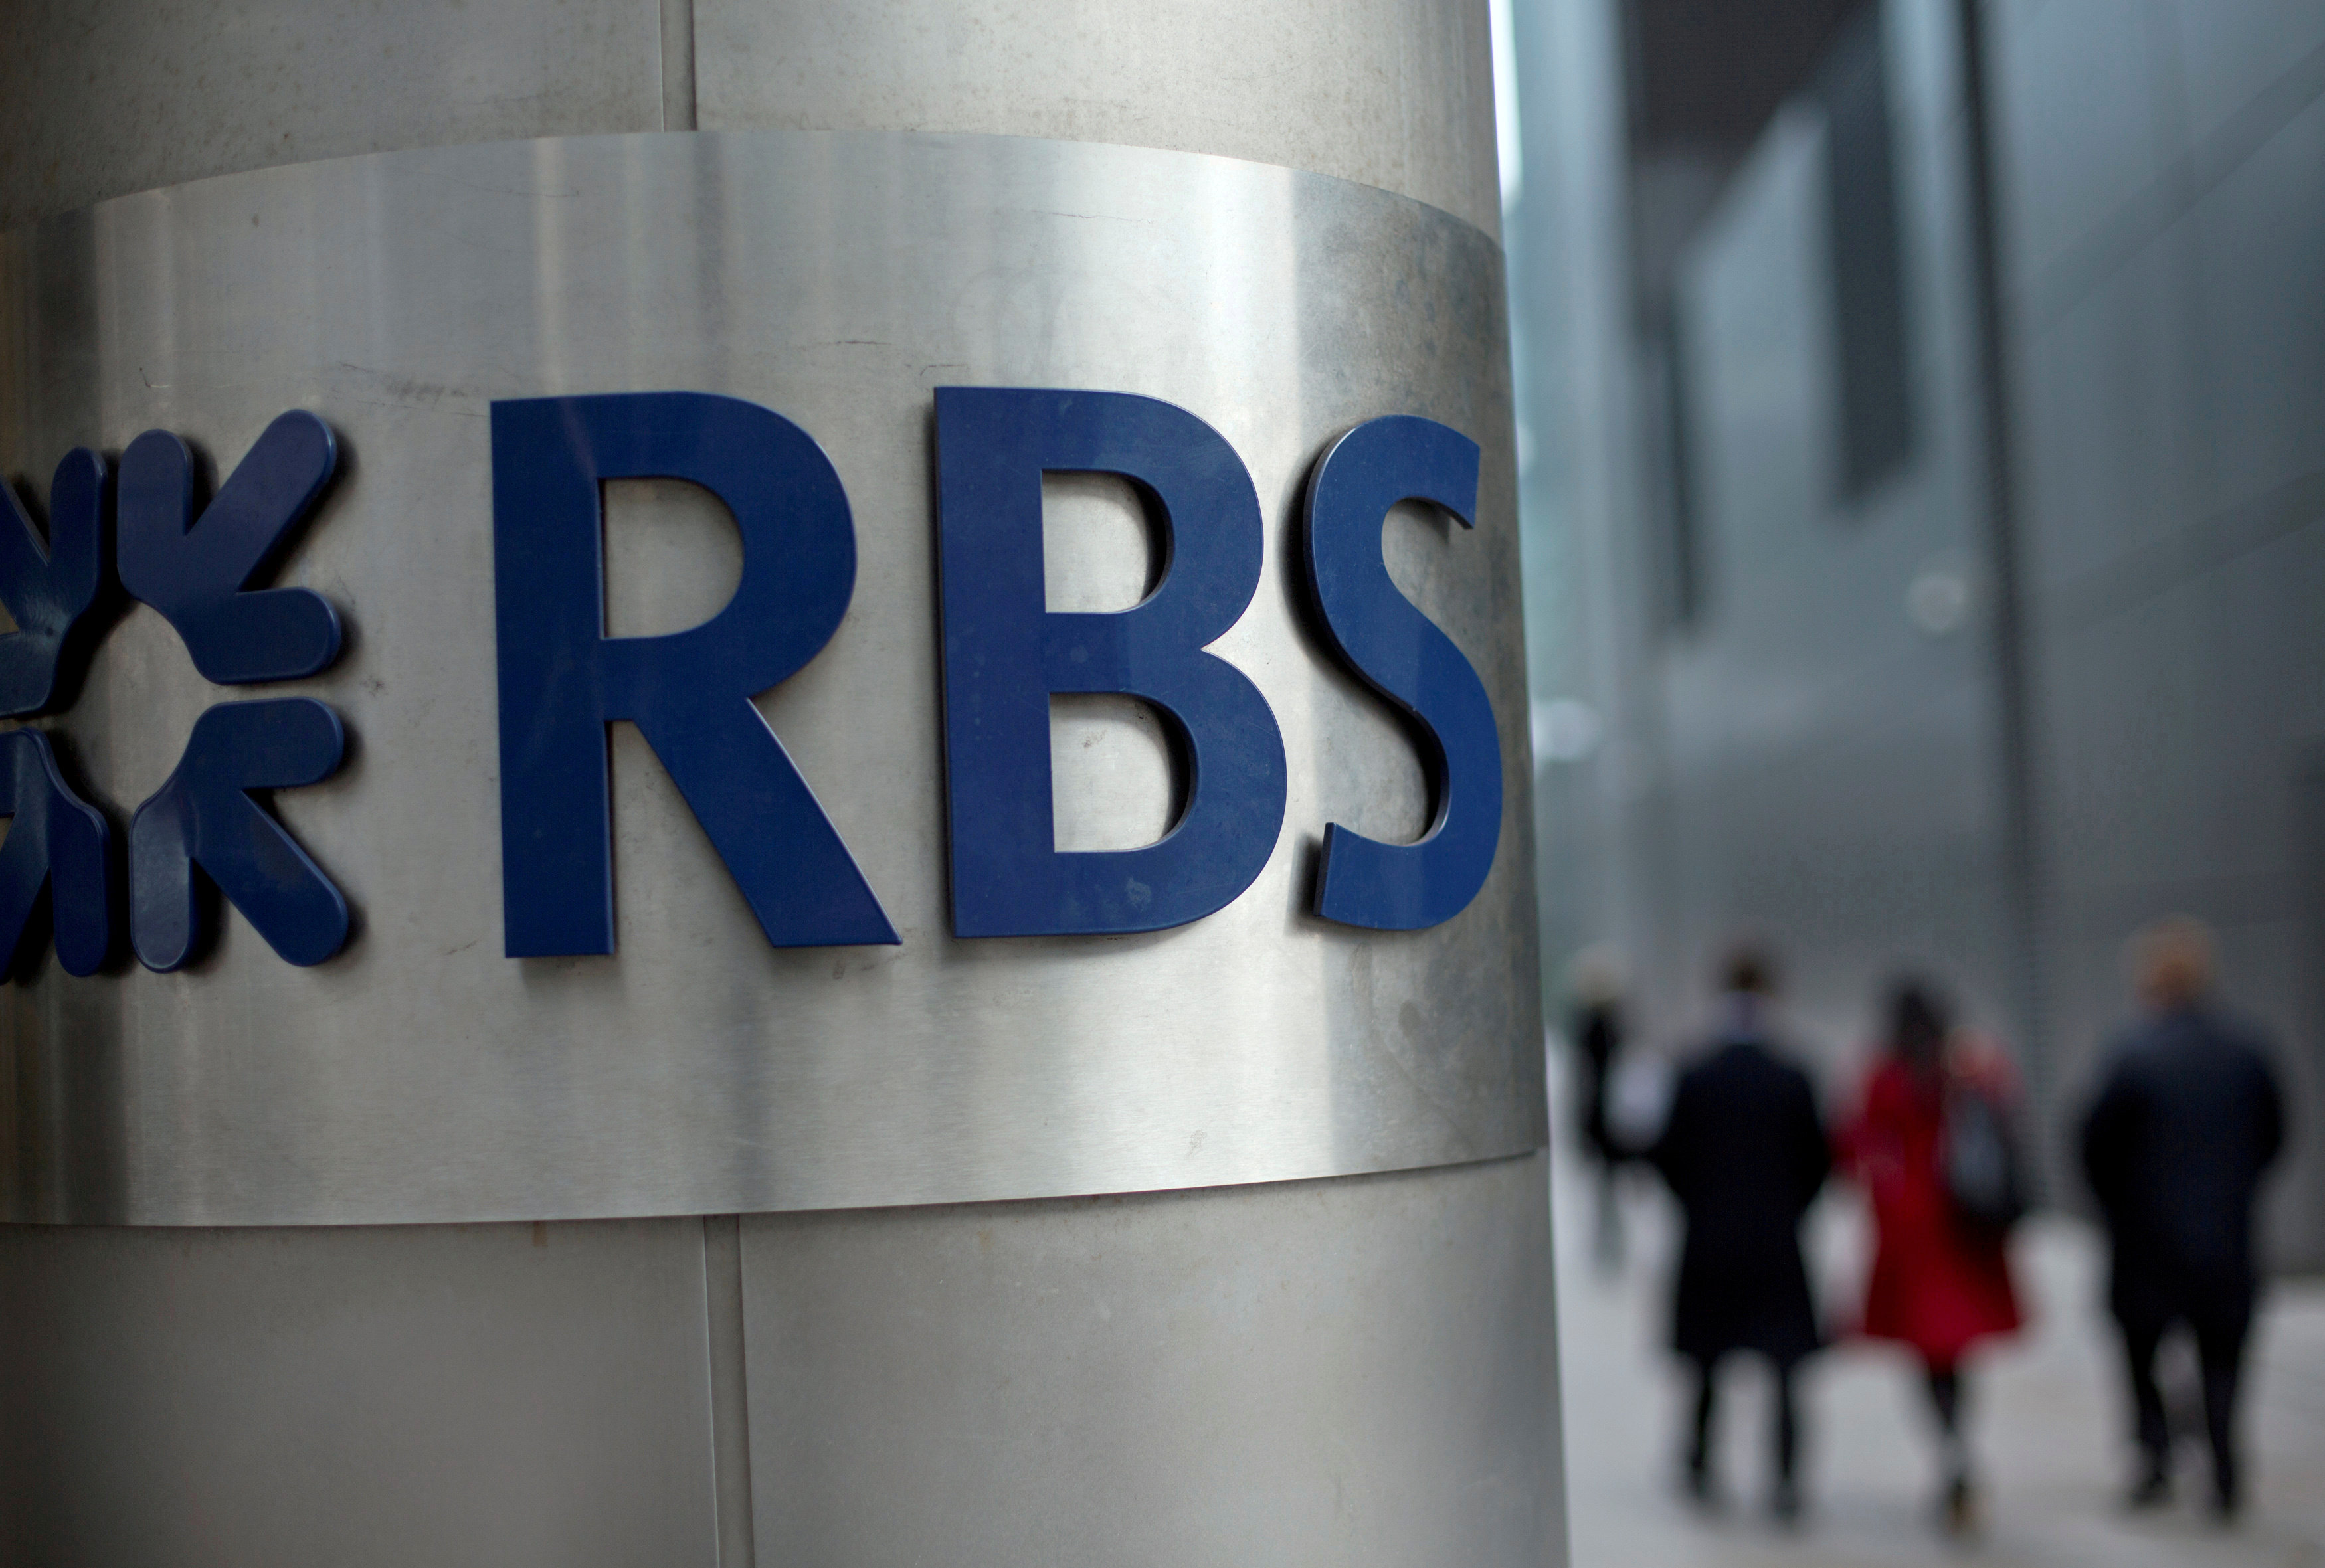 Chance of US settlement this year diminishing: RBS chief